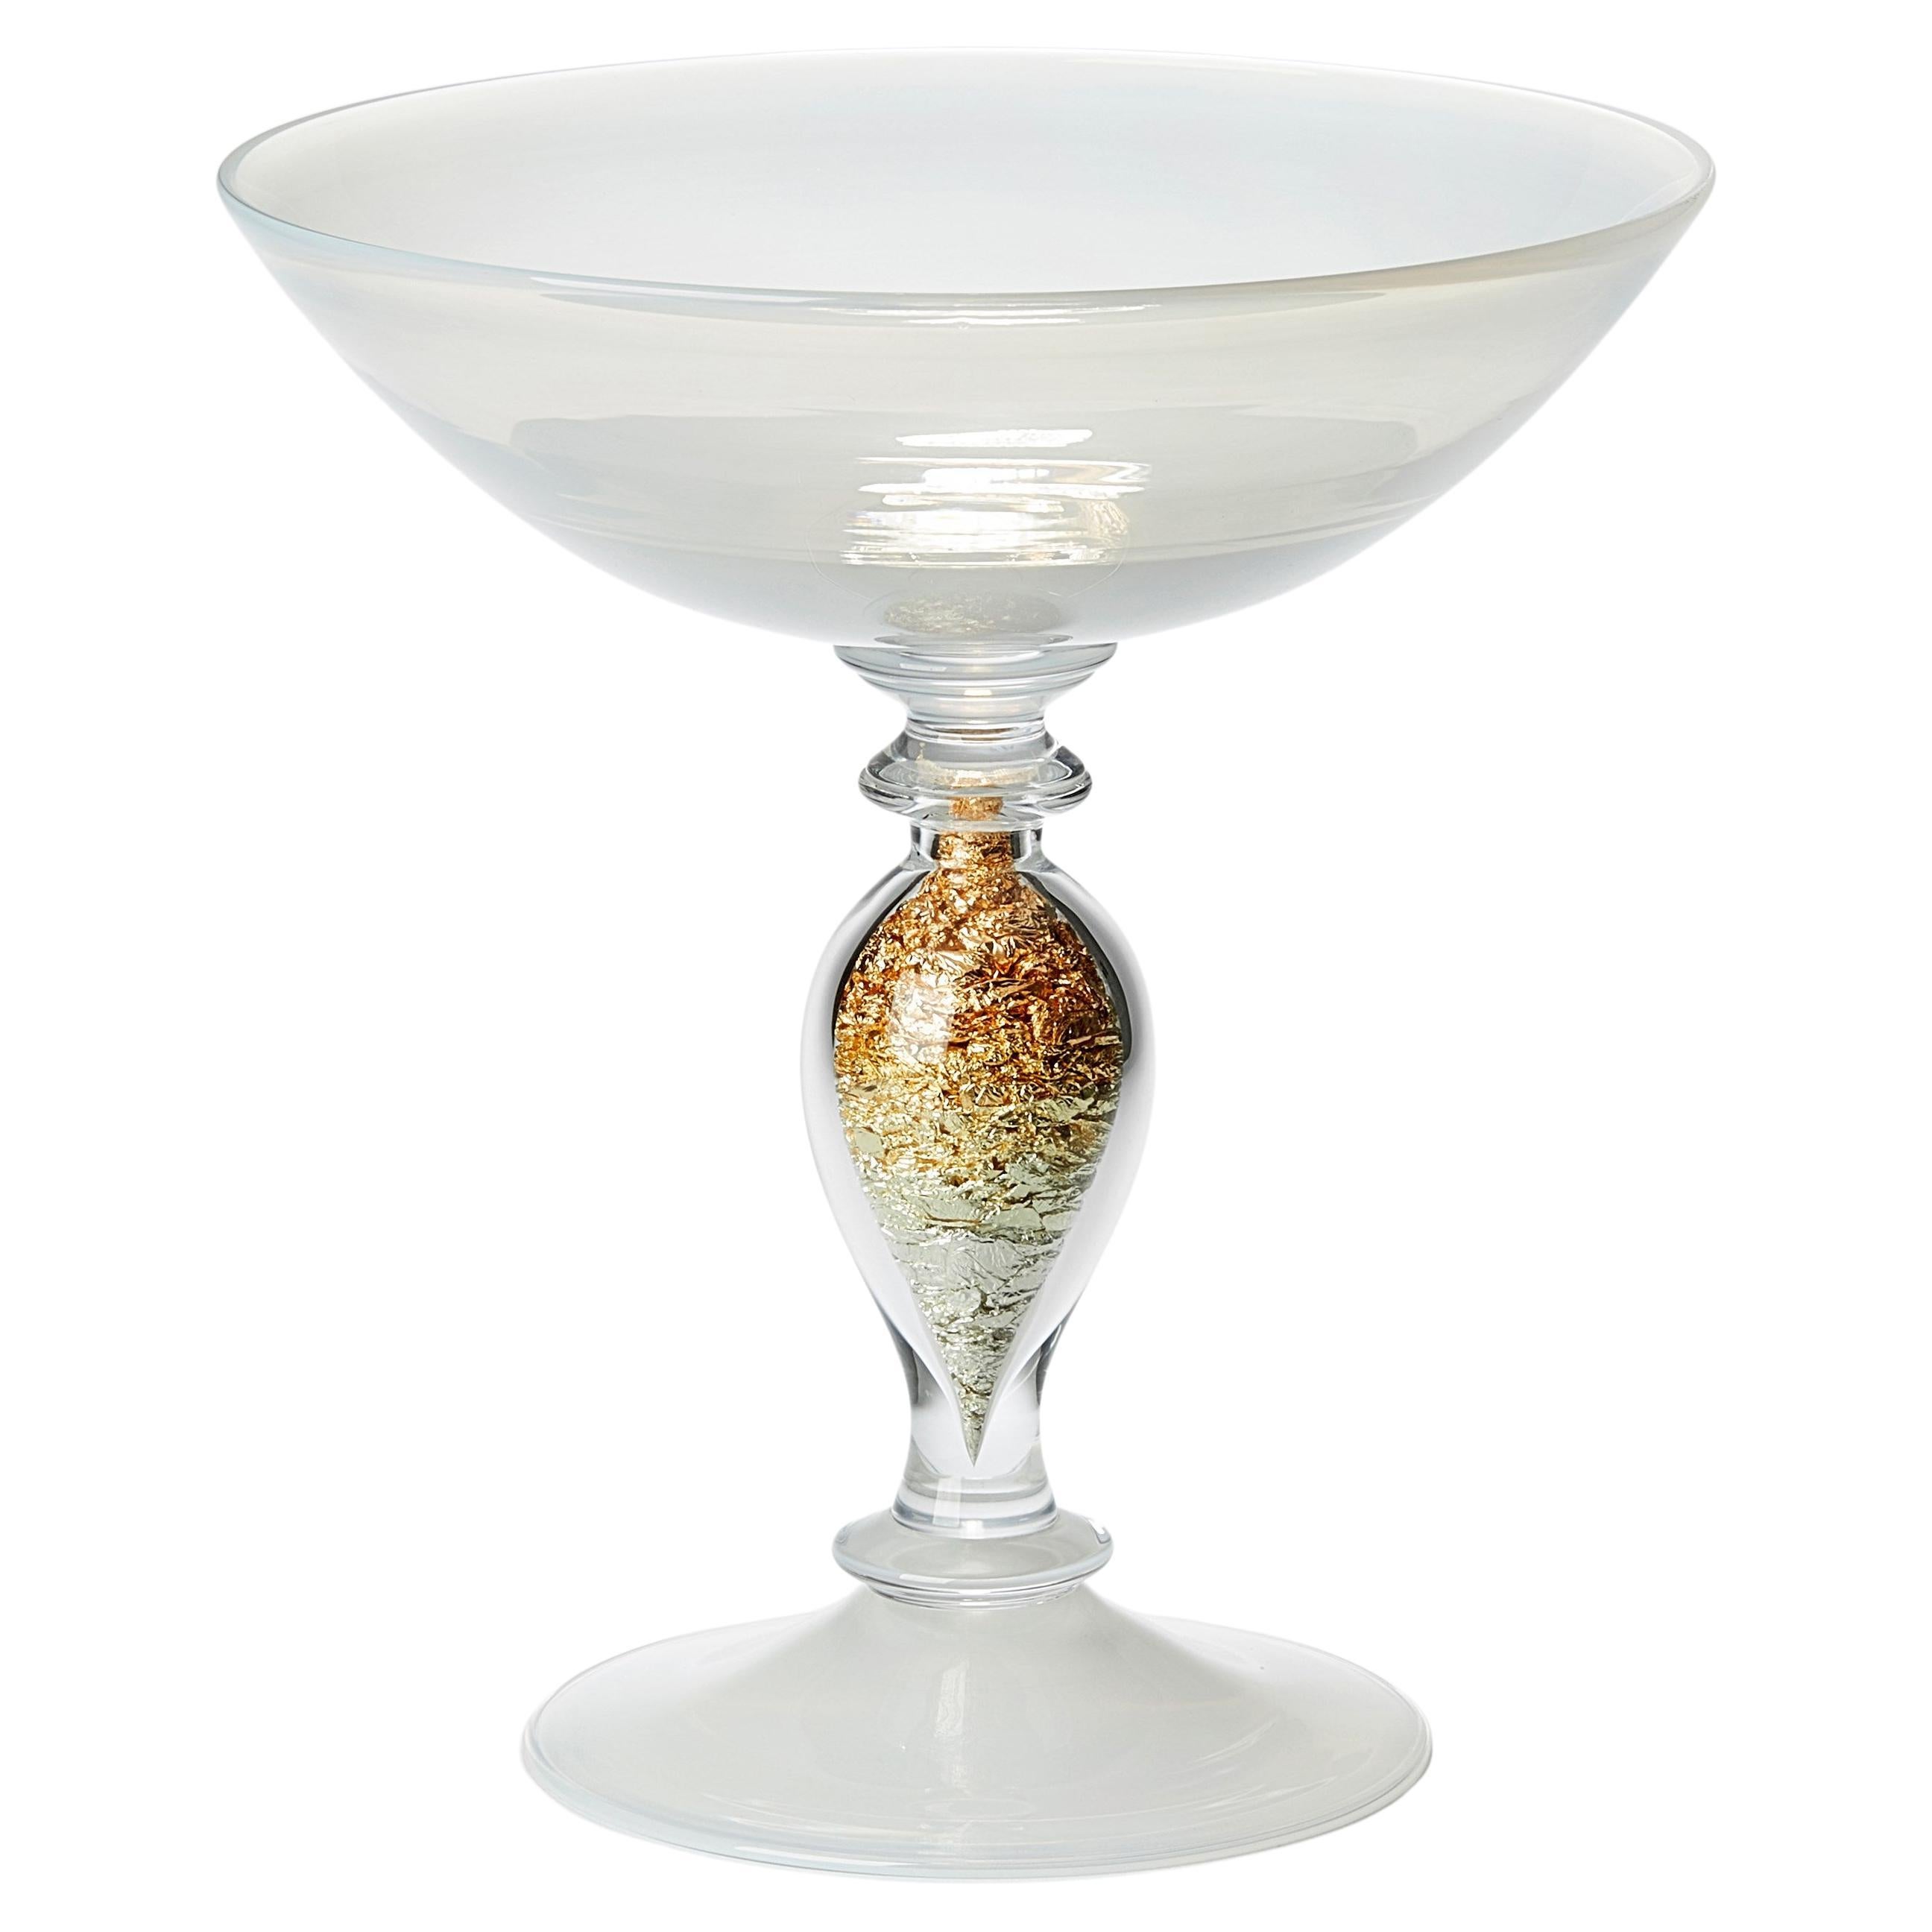 Gambo d’Oro, a milky white glass & gold leaf centrepiece by Anthony Scala For Sale